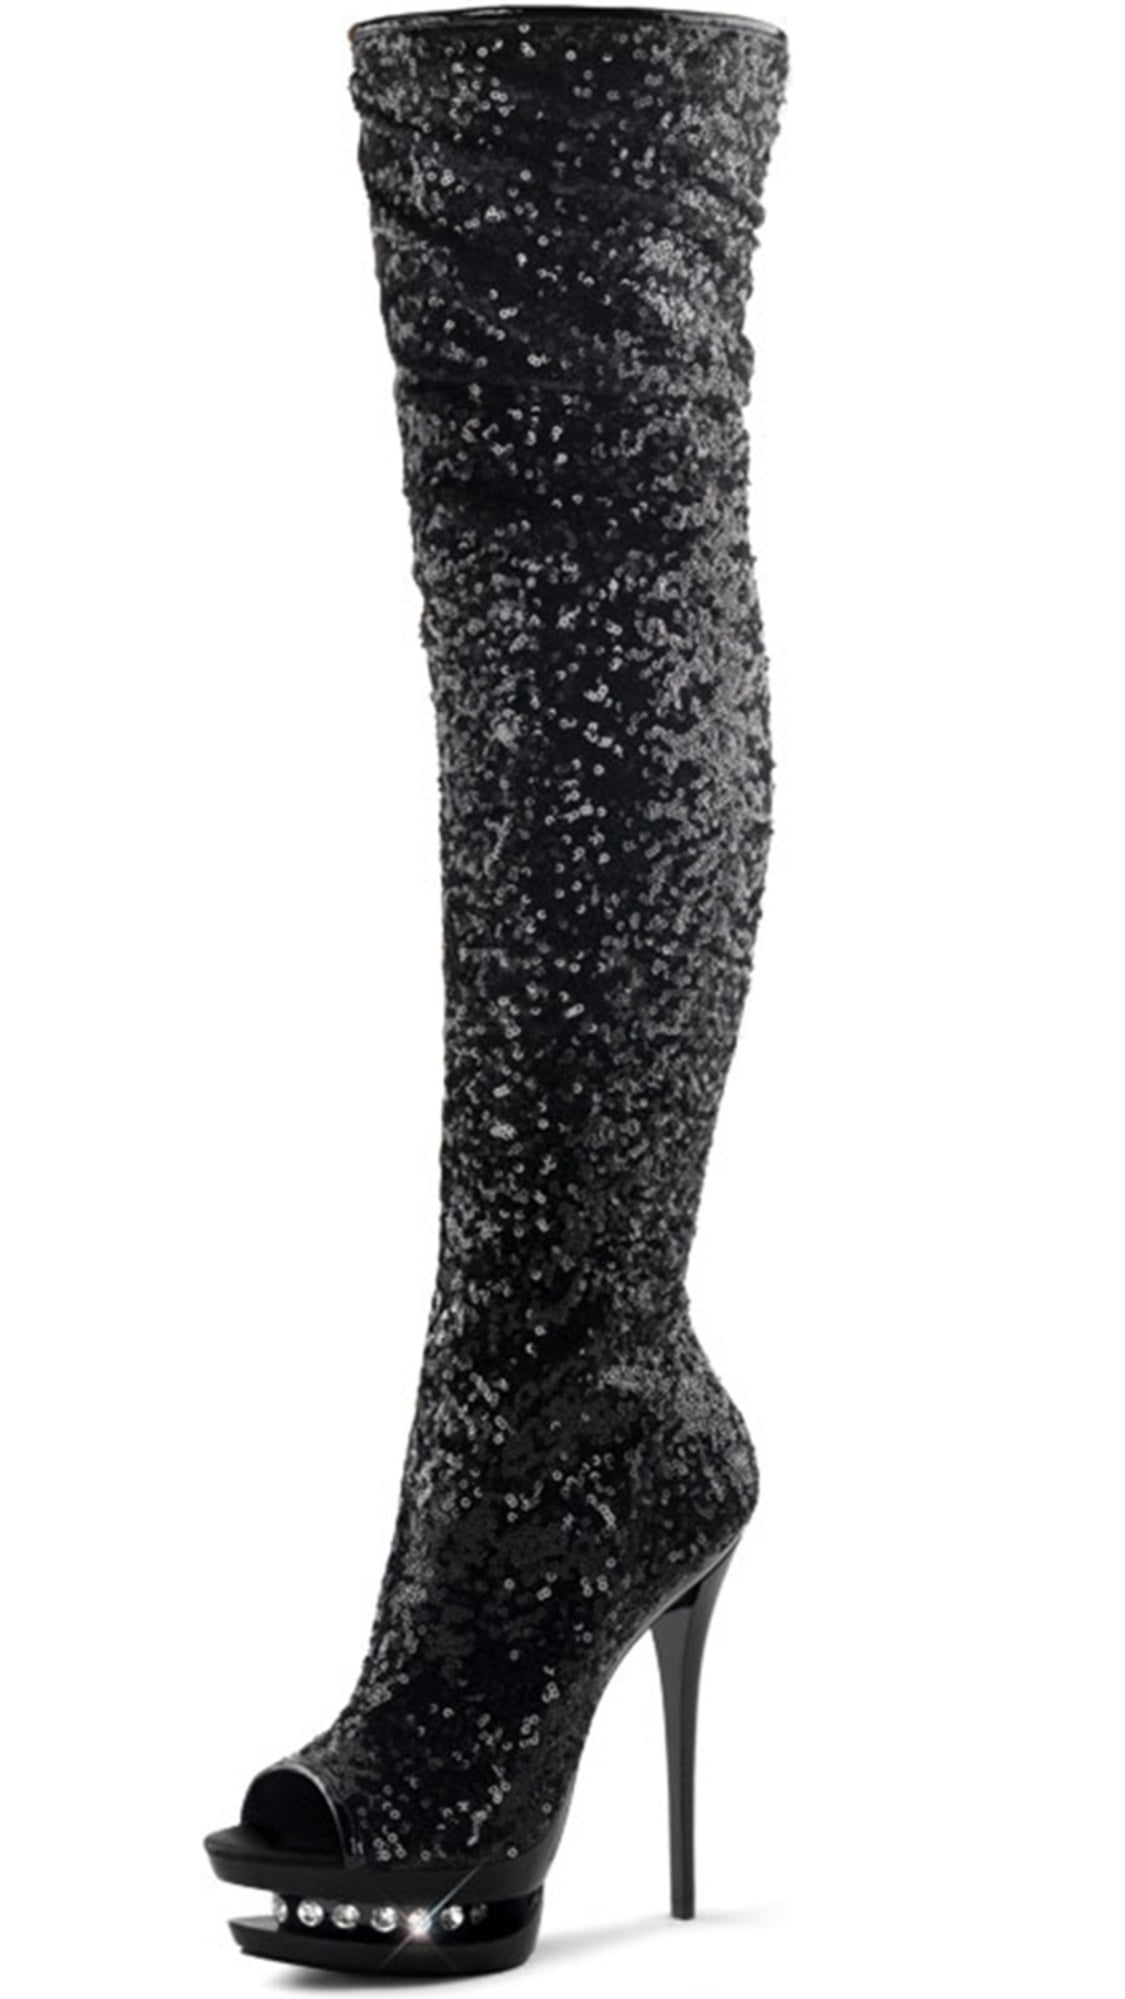 black sparkly thigh high boots